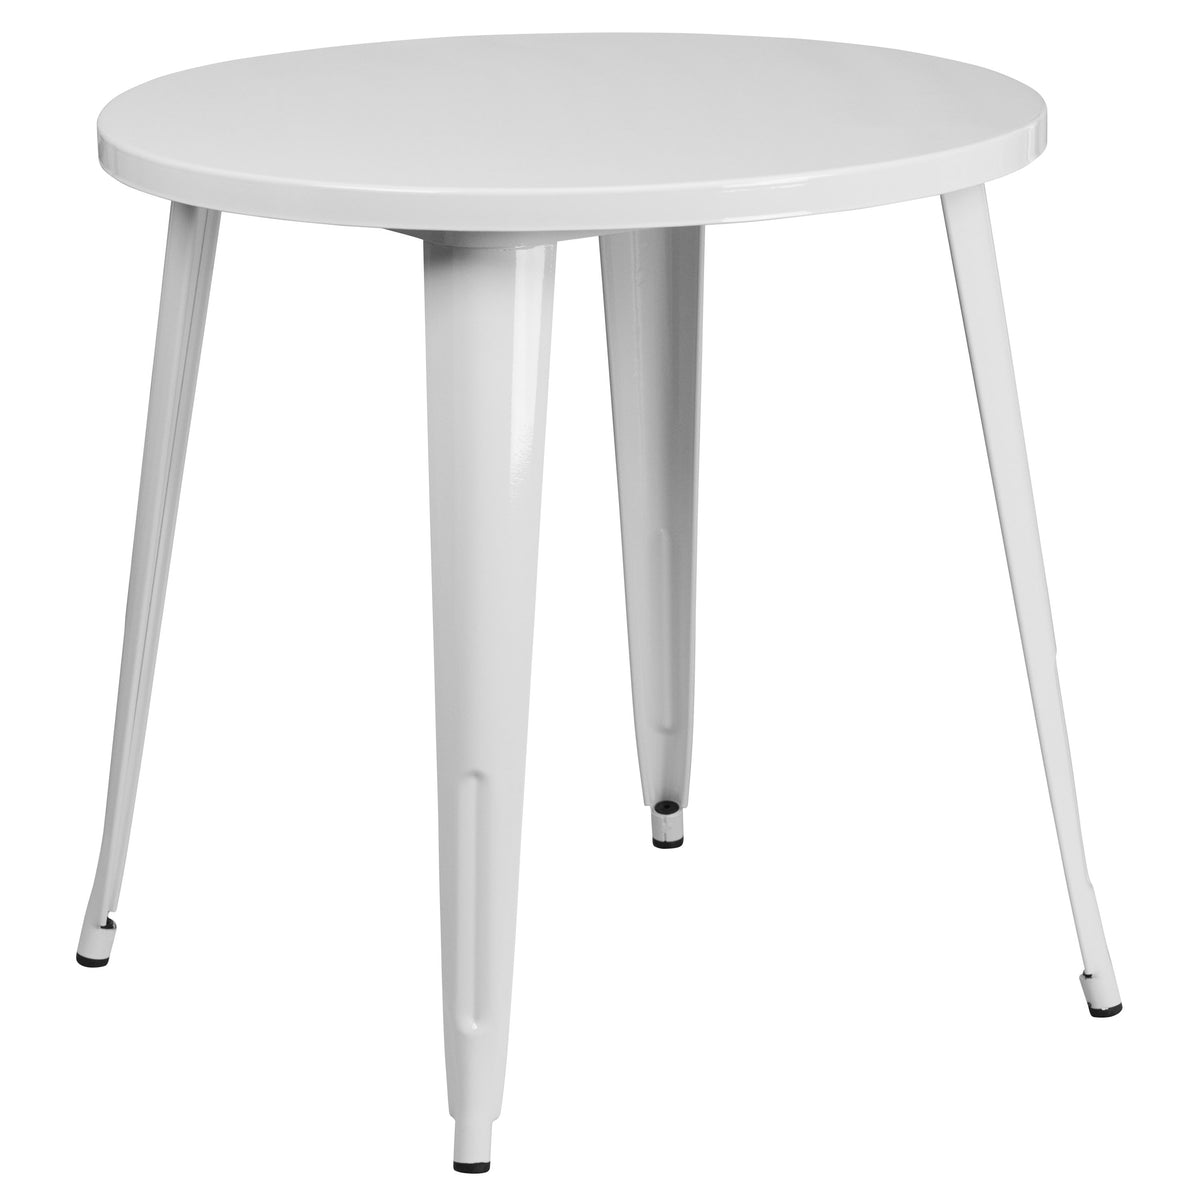 White |#| 30inch Round White Metal Indoor-Outdoor Table Set with 2 Cafe Chairs